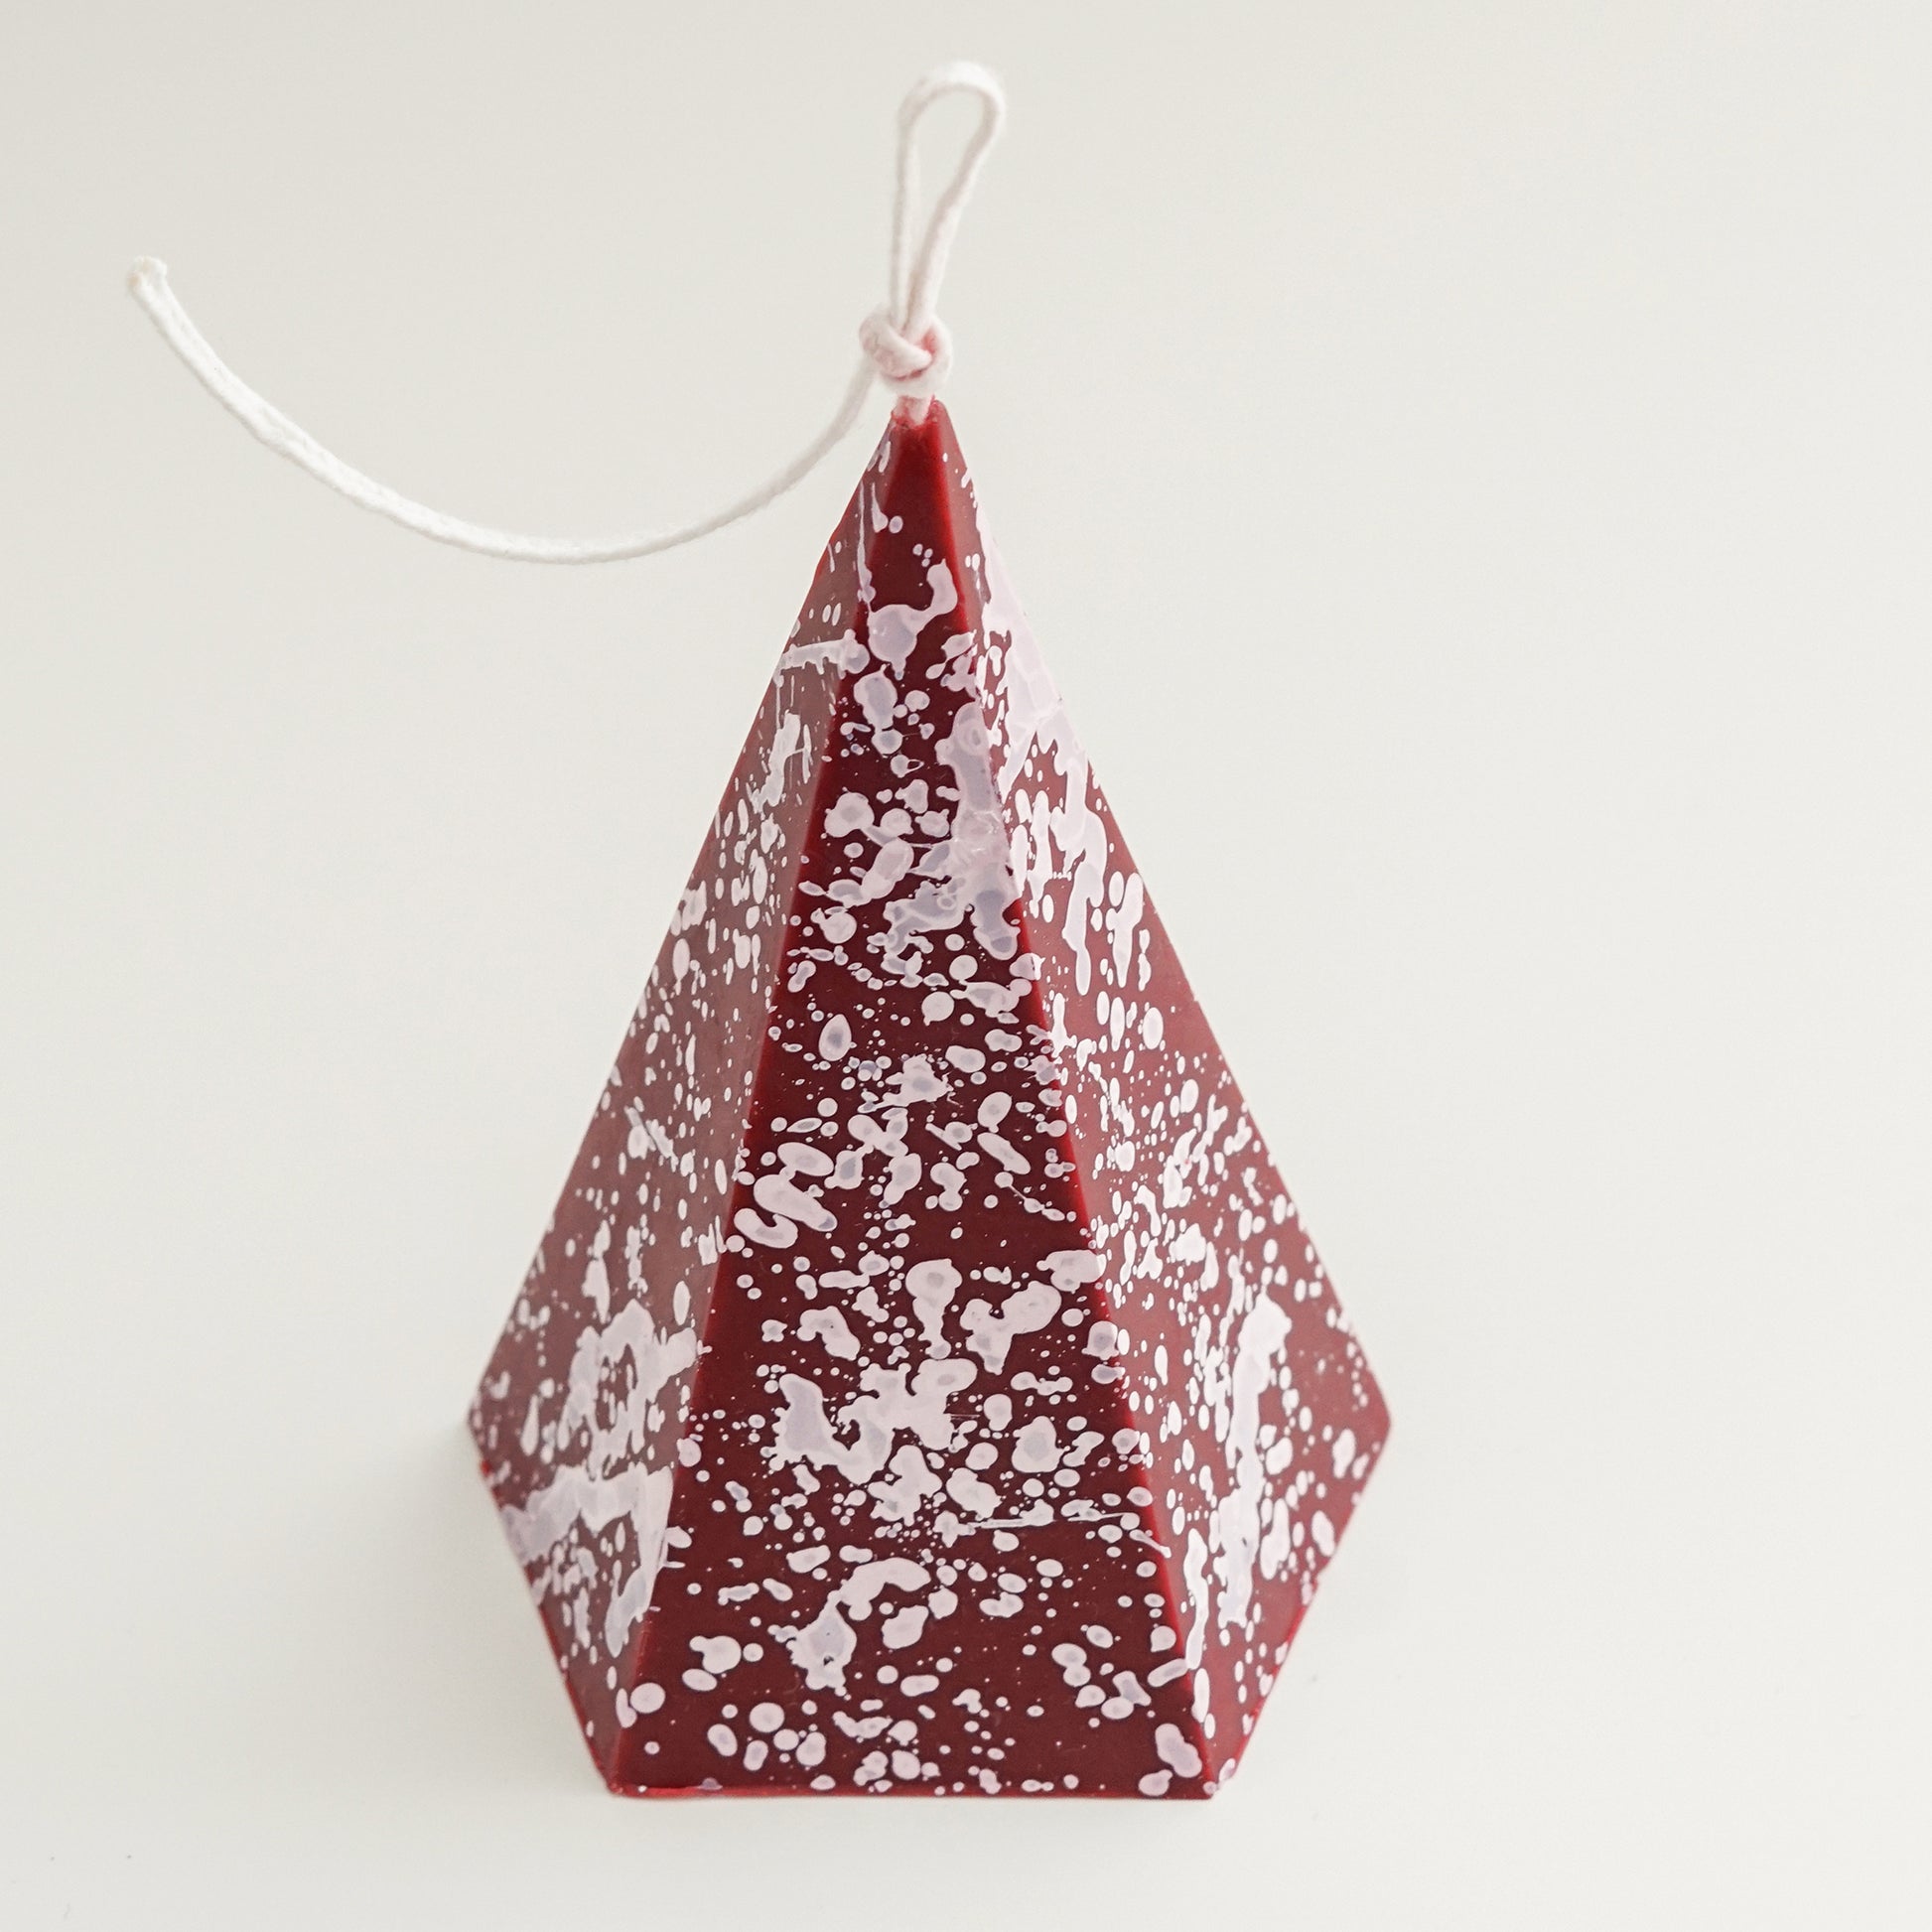 a burgundy color pentagonal pyramid shape soy pillar candle with white splatter pattern